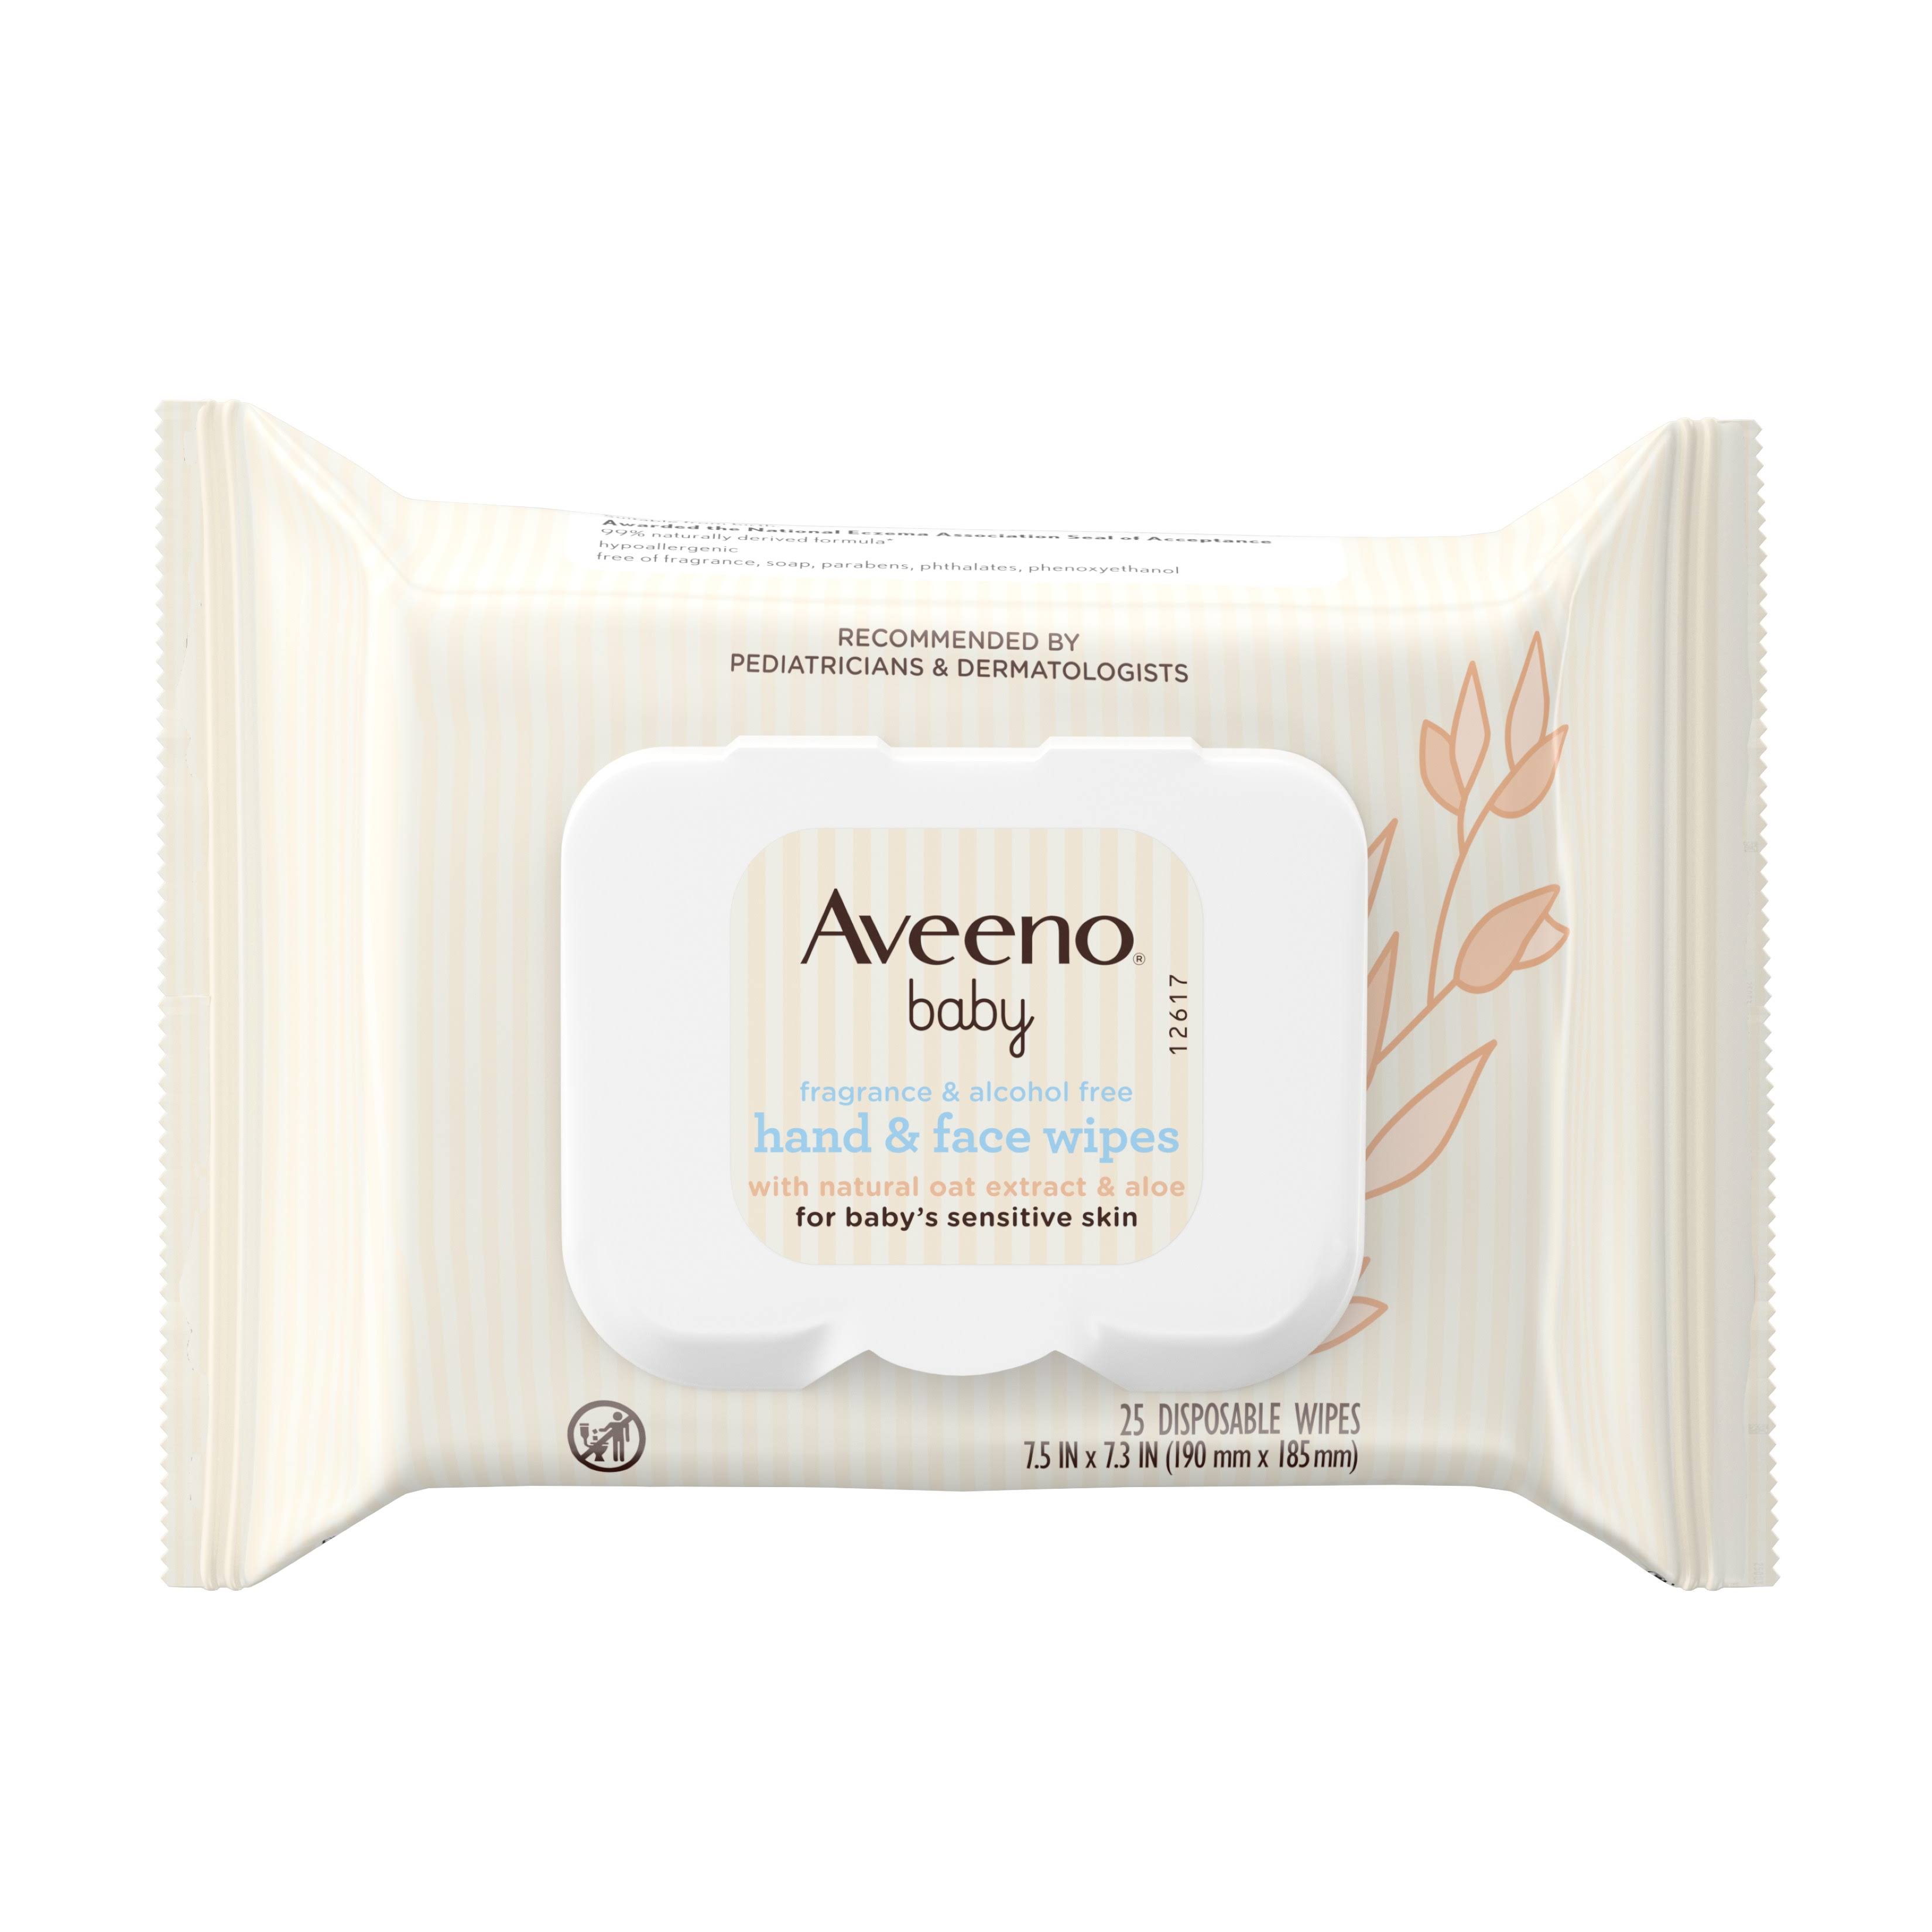 Aveeno Baby Disposable Wipes, Hand & Face - 25 wipes